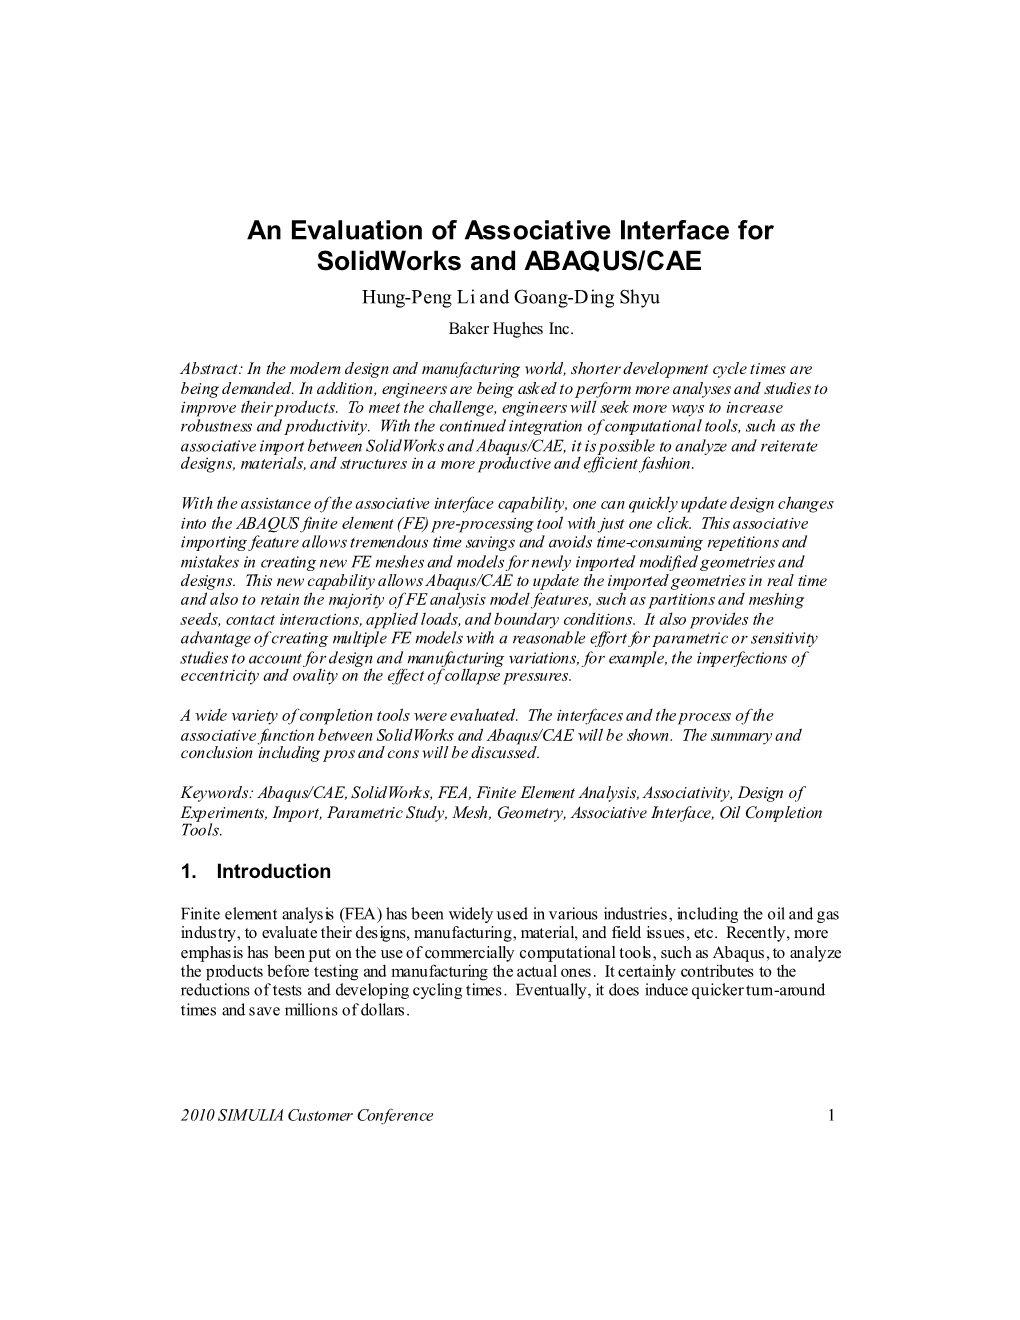 An Evaluation of Associative Interface for Solidworks and ABAQUS/CAE Hung-Peng Li and Goang-Ding Shyu Baker Hughes Inc